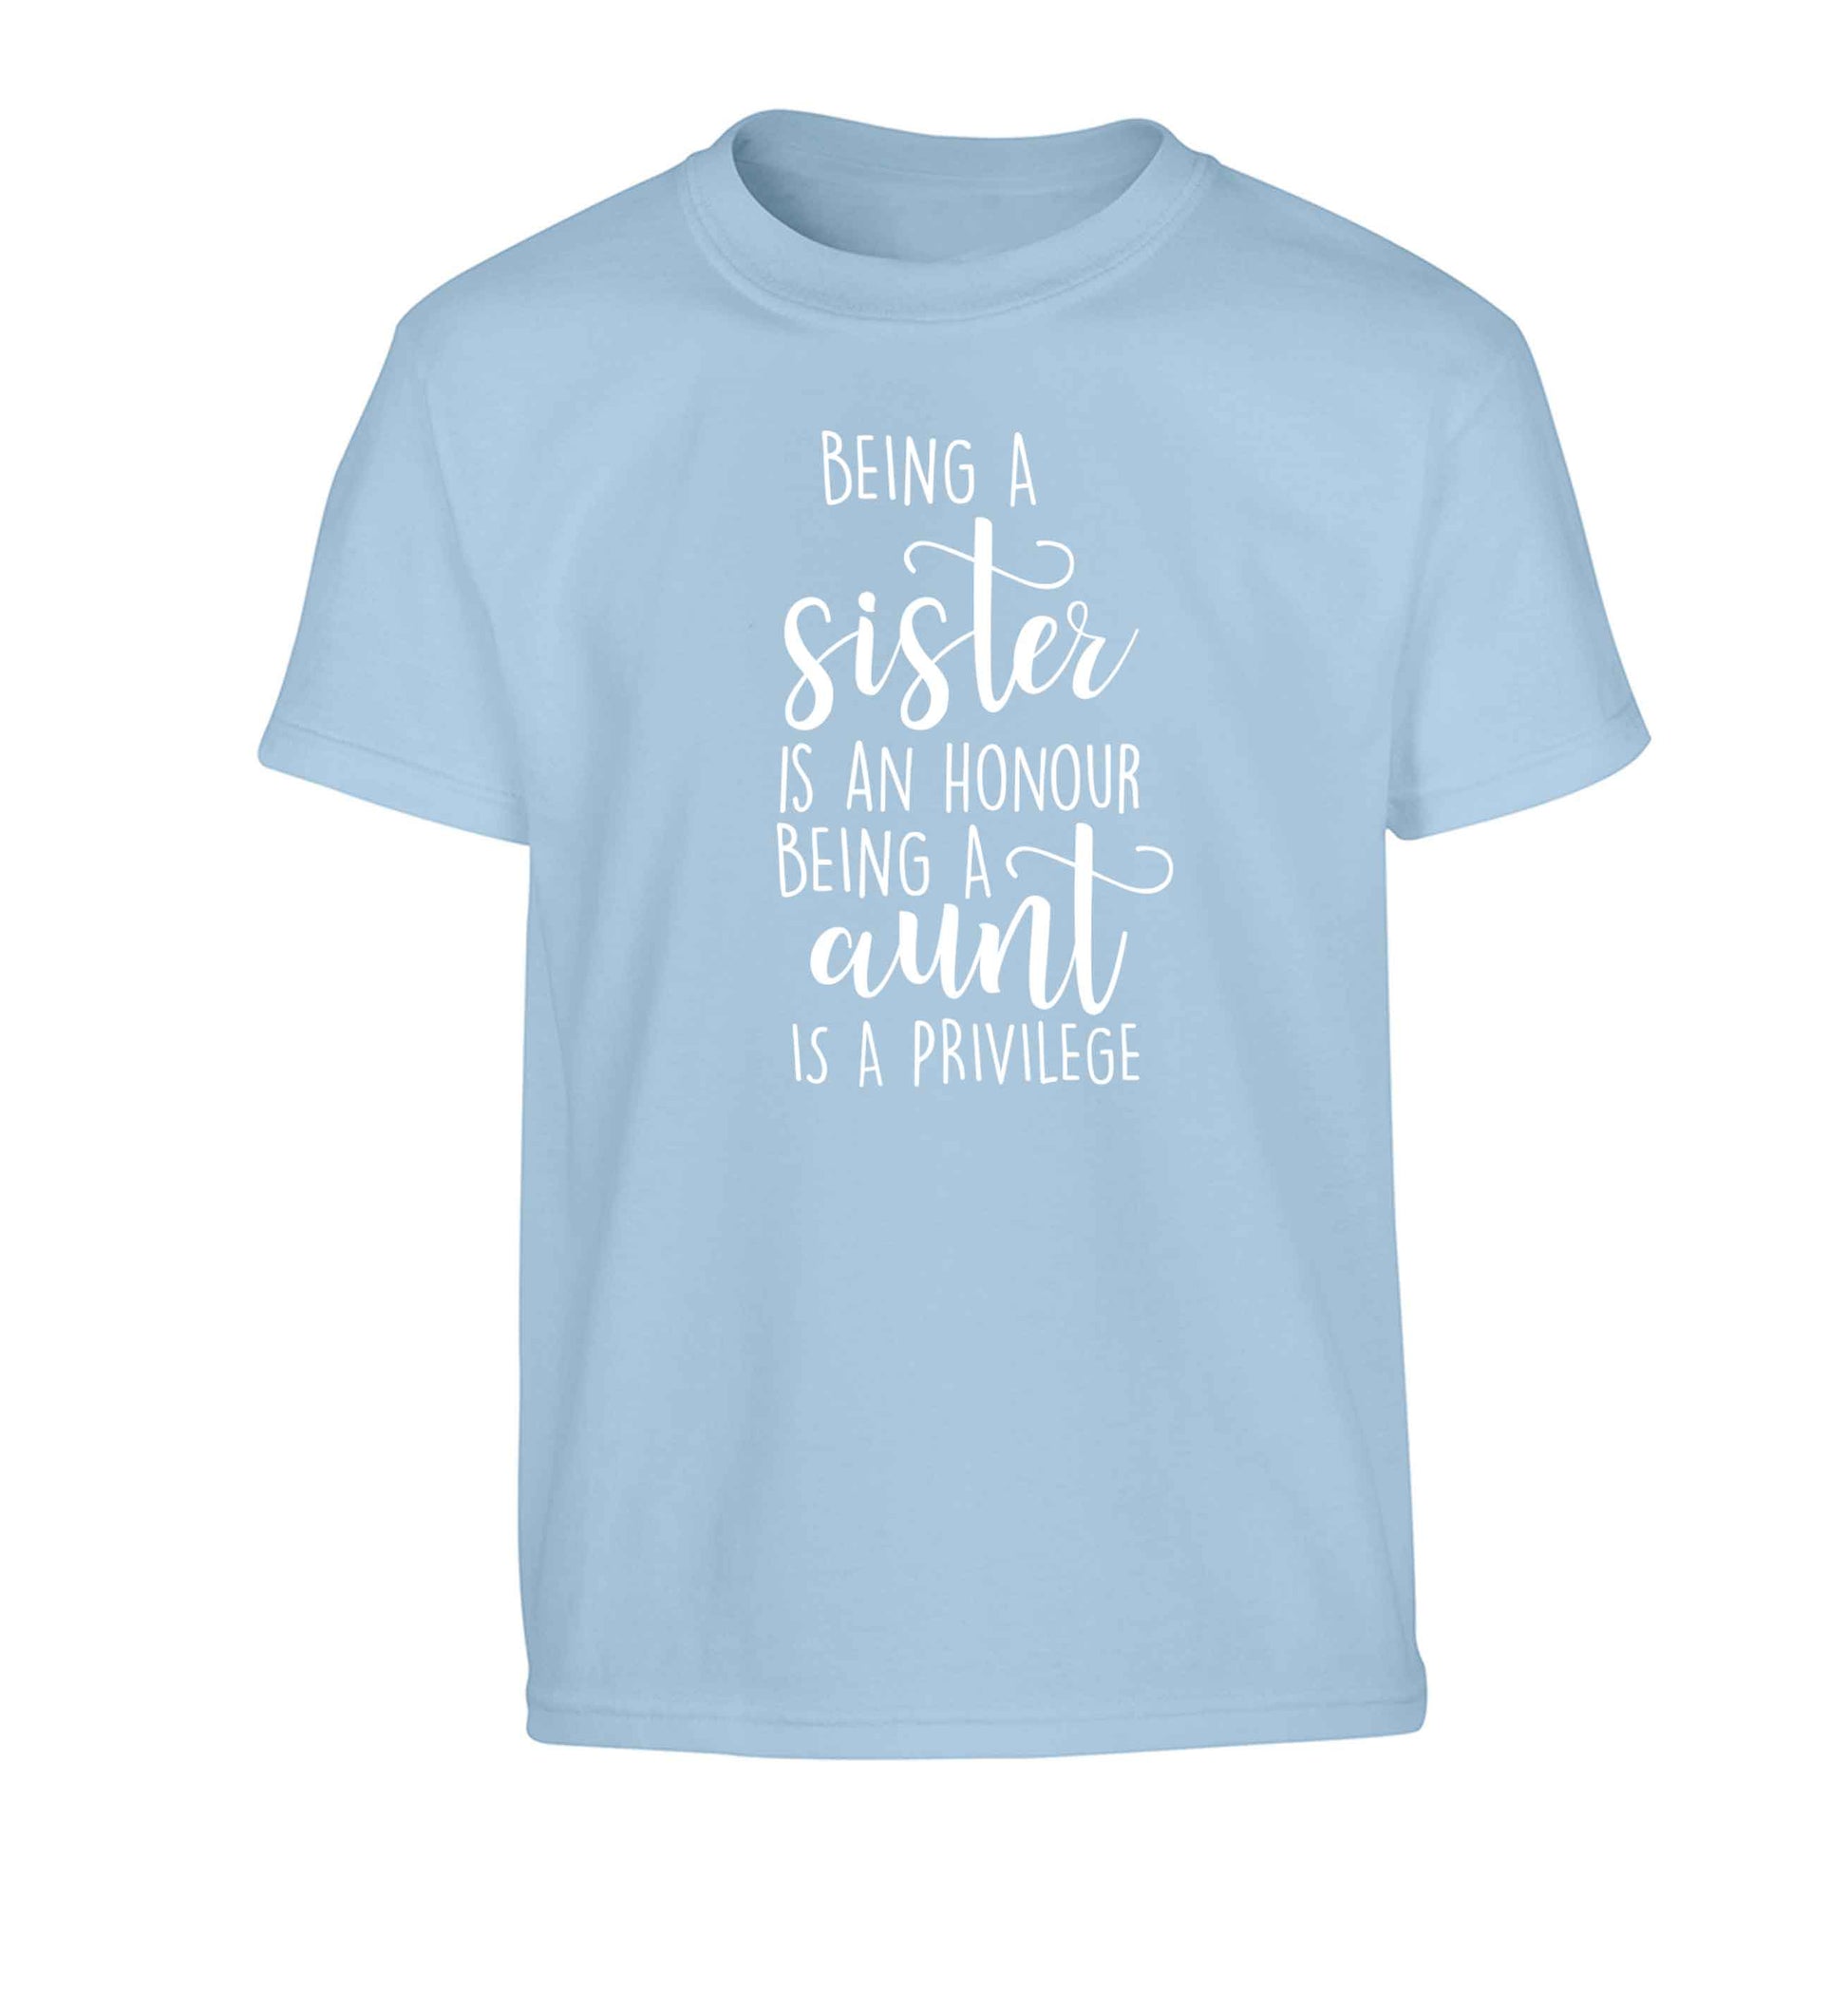 Being a sister is an honour being an auntie is a privilege Children's light blue Tshirt 12-13 Years